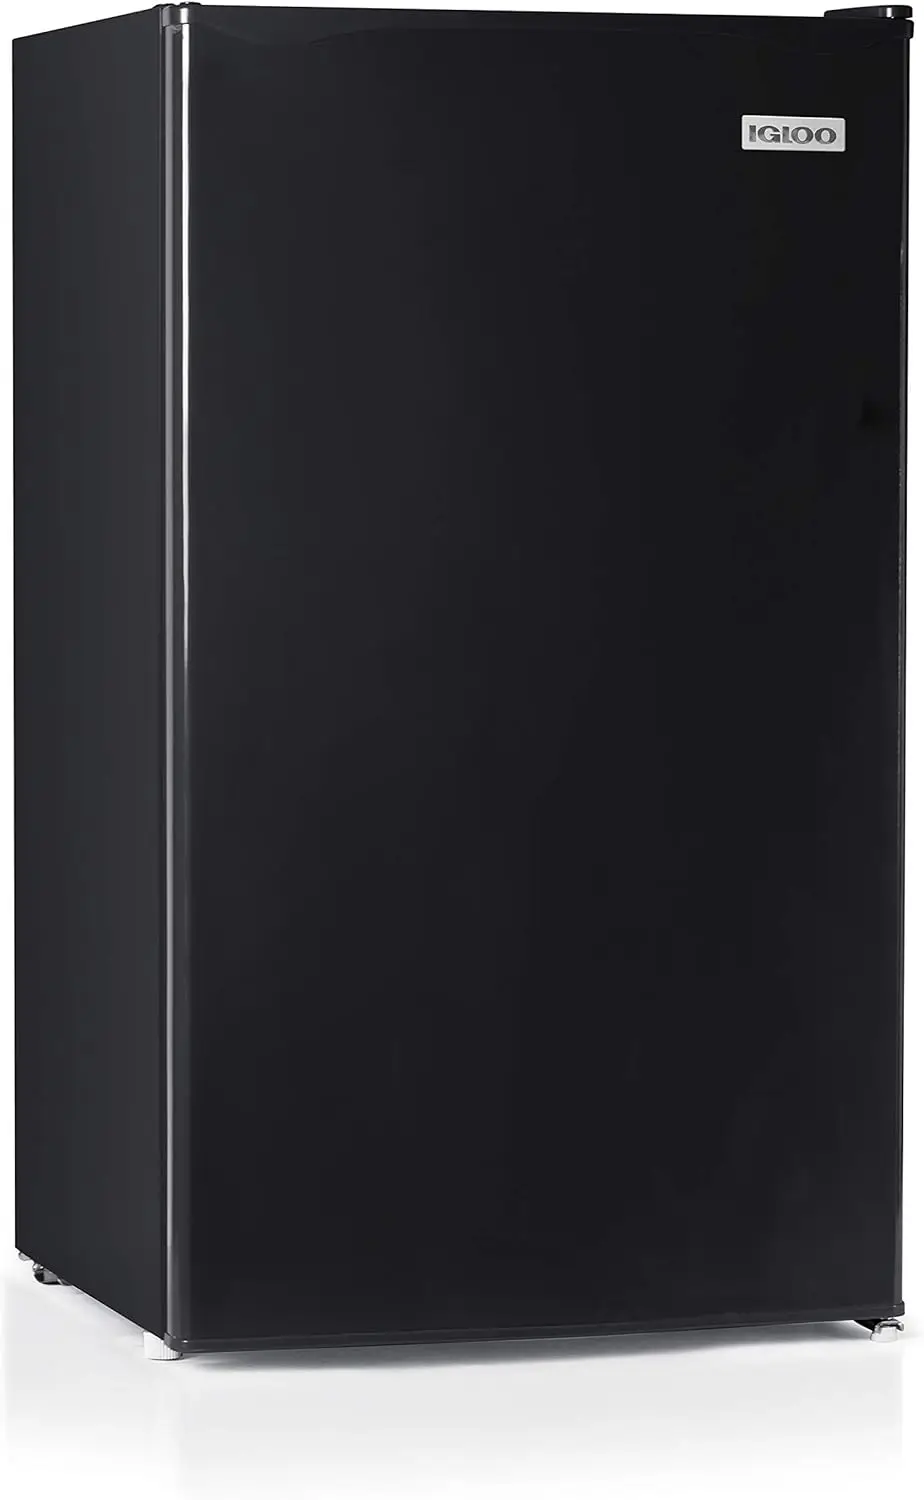 

Igloo 3.2 Cu.Ft. Single Door Compact Refrigerator with Freezer - Slide Out Glass Shelf, Perfect for Homes, Offices, Dorms -Black